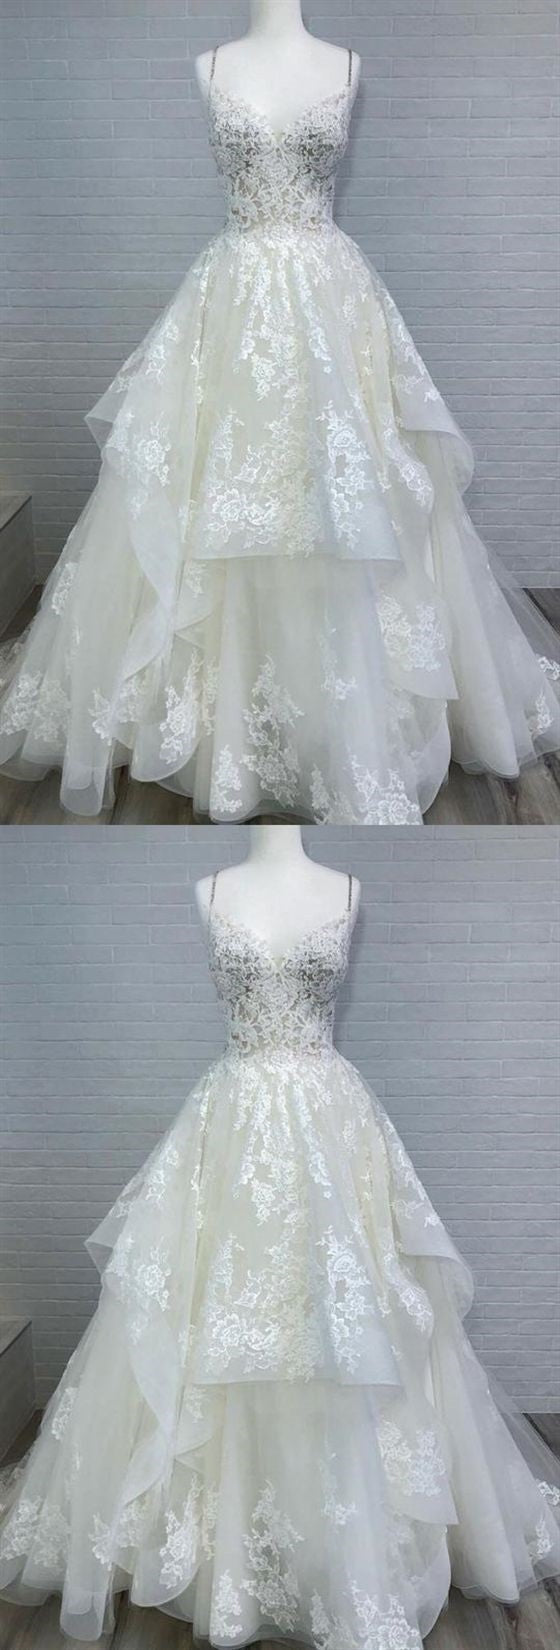 Spaghetti Straps Lace Ball Gown Wedding Dress - DollyGown